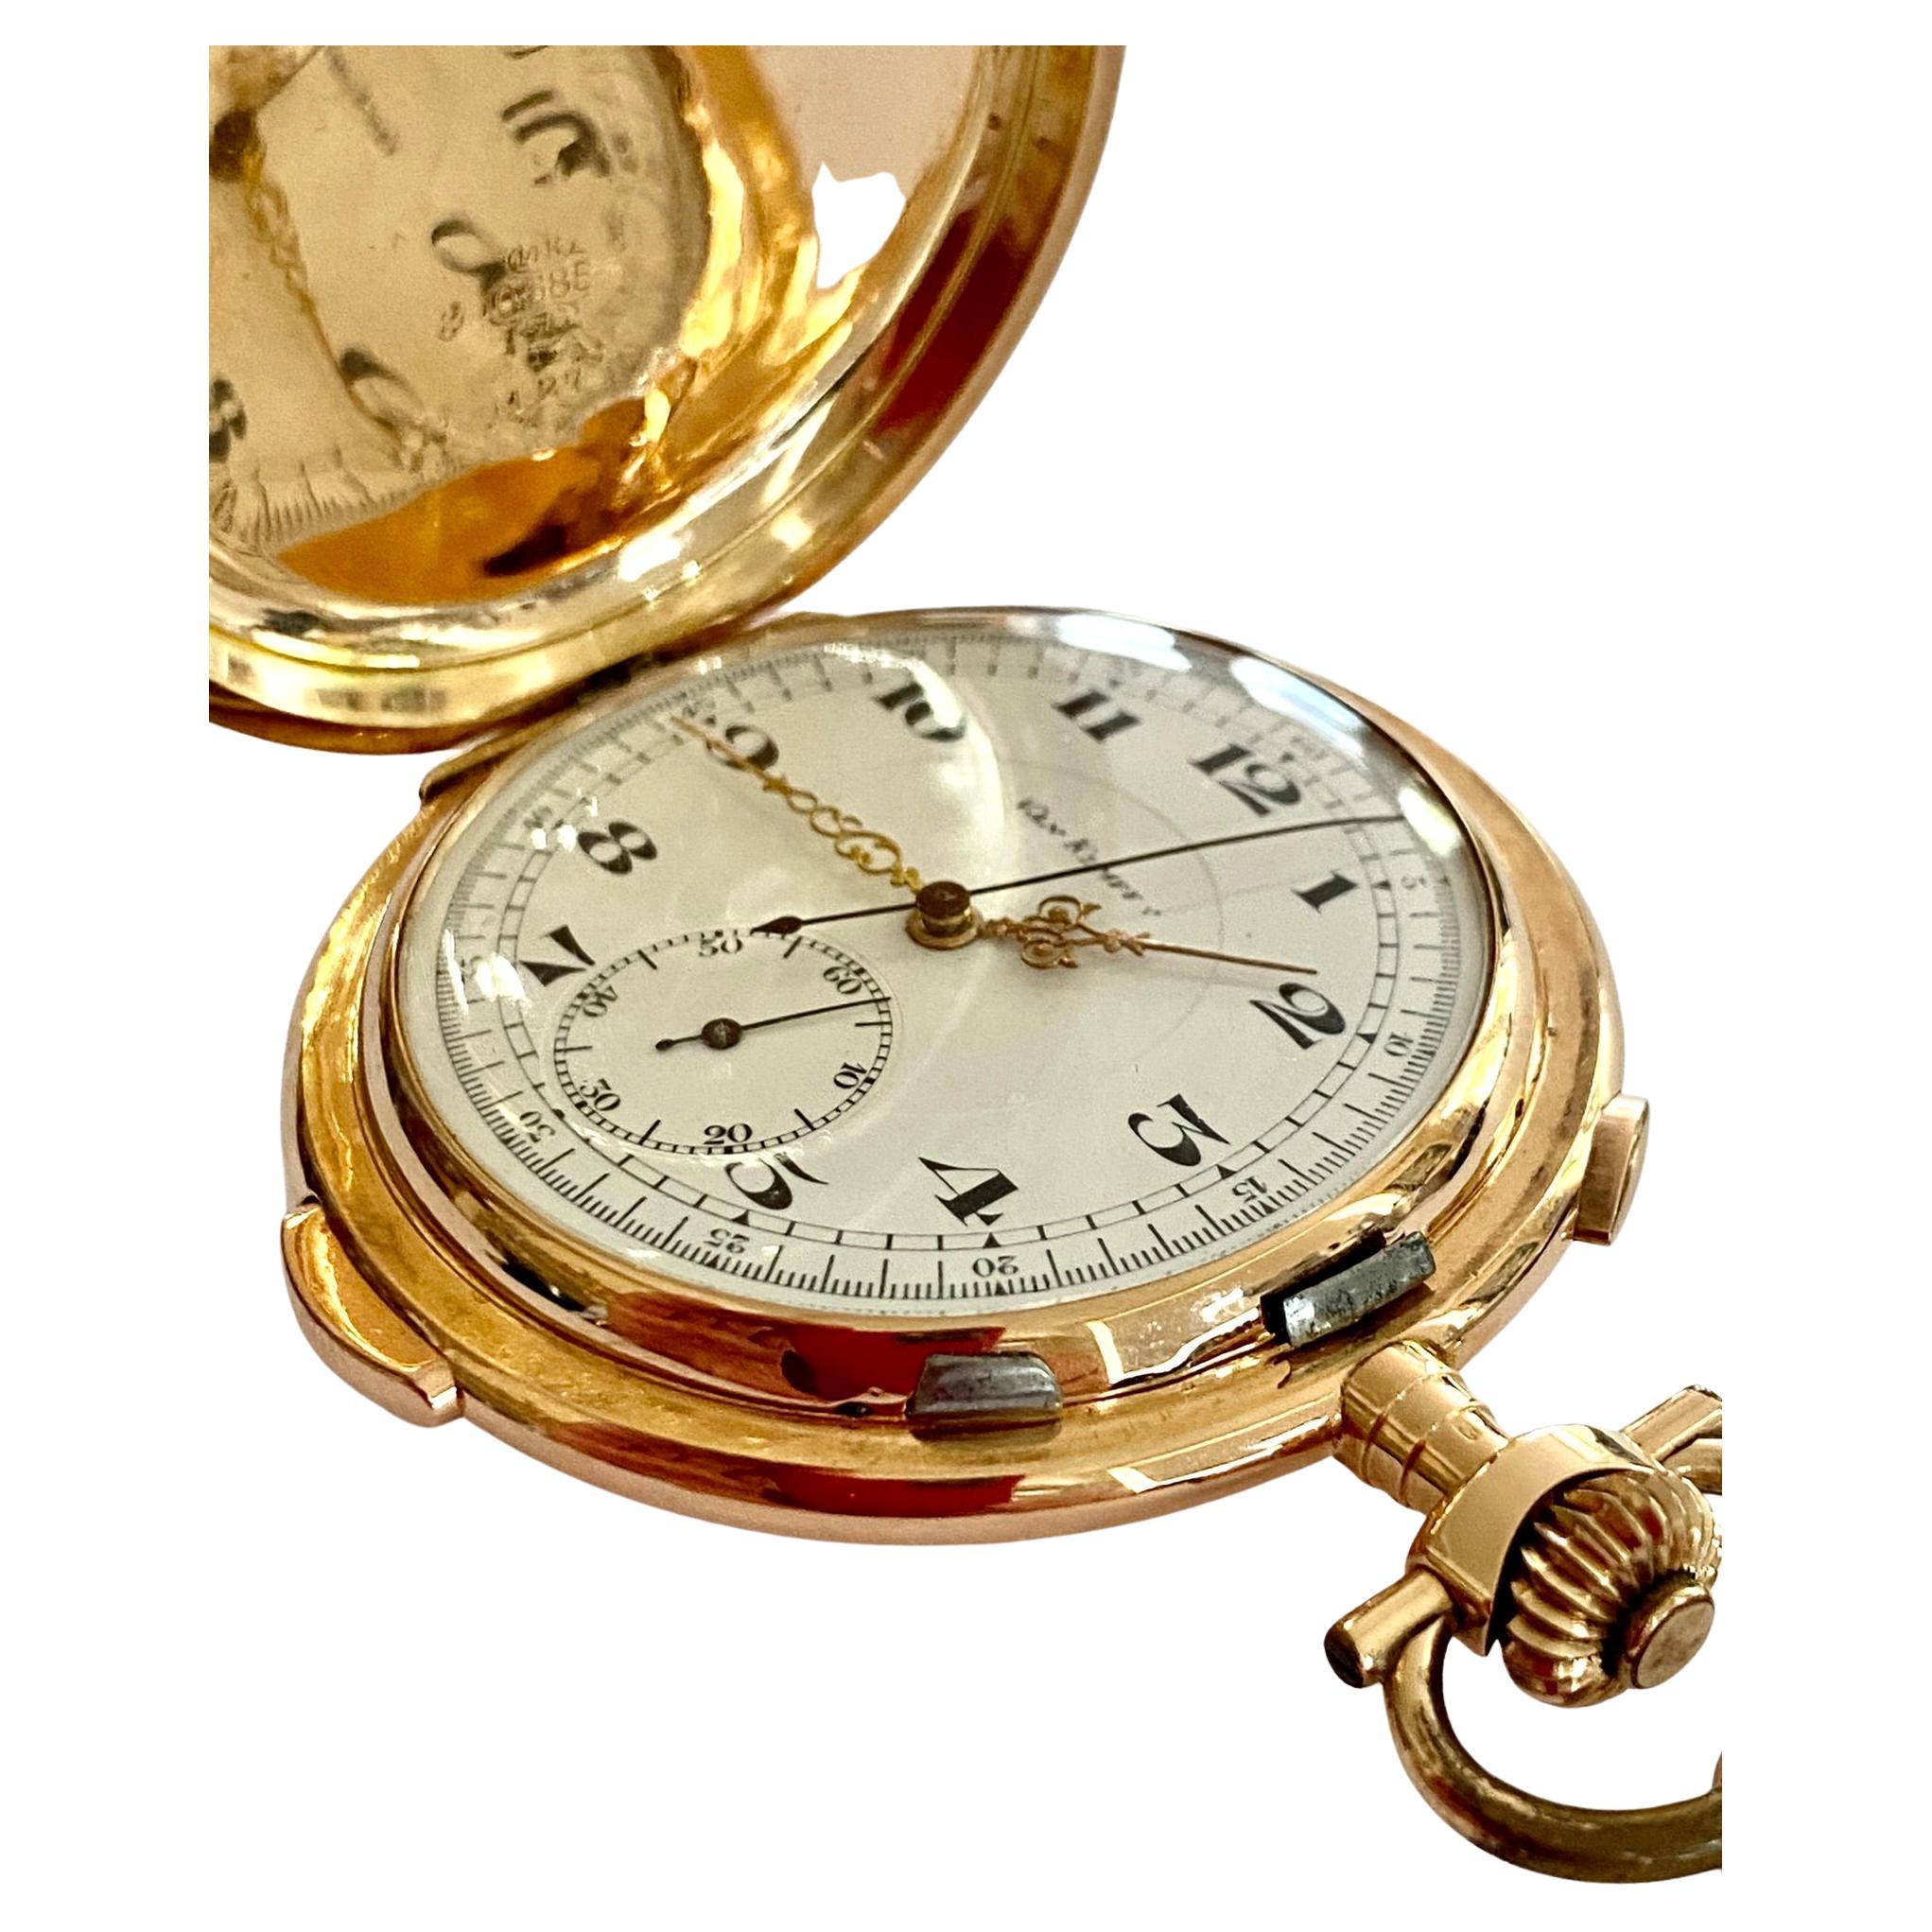 14k. Rose Gold Pocket Watch, Minute Repetition Striking Mechanism, Chronograph